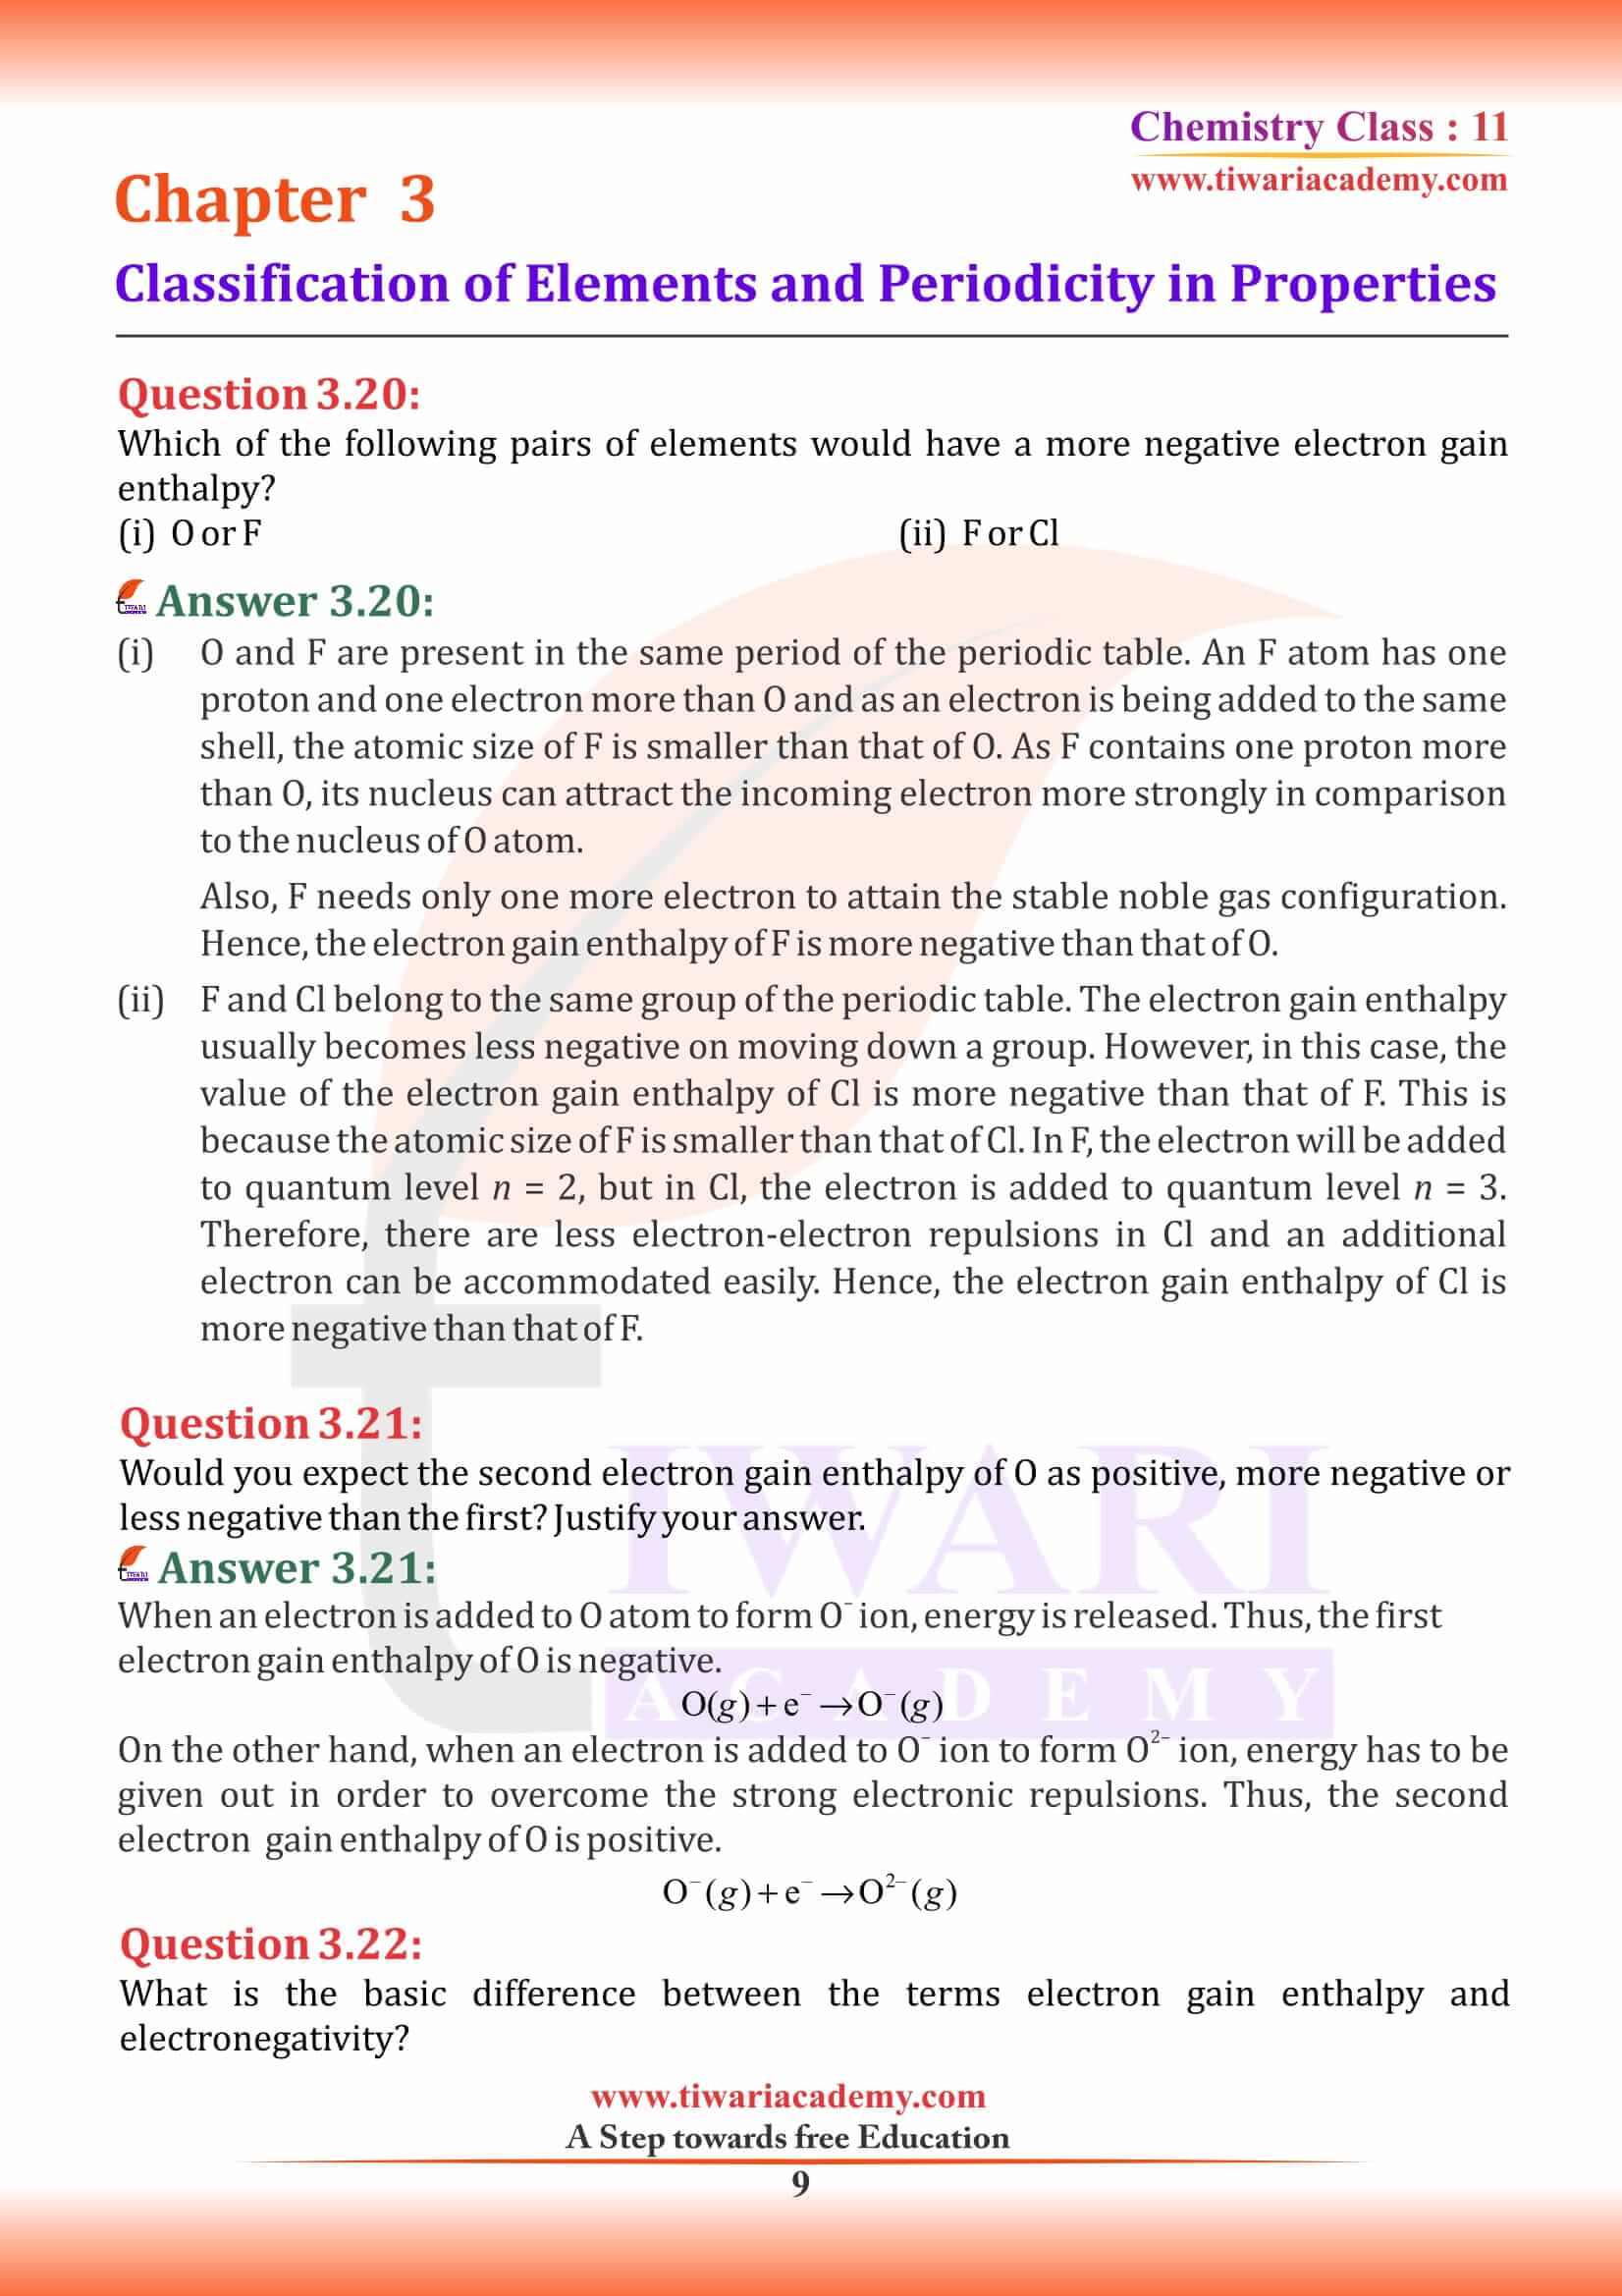 NCERT Solutions for Class 11 Chemistry Chapter 3 free to download